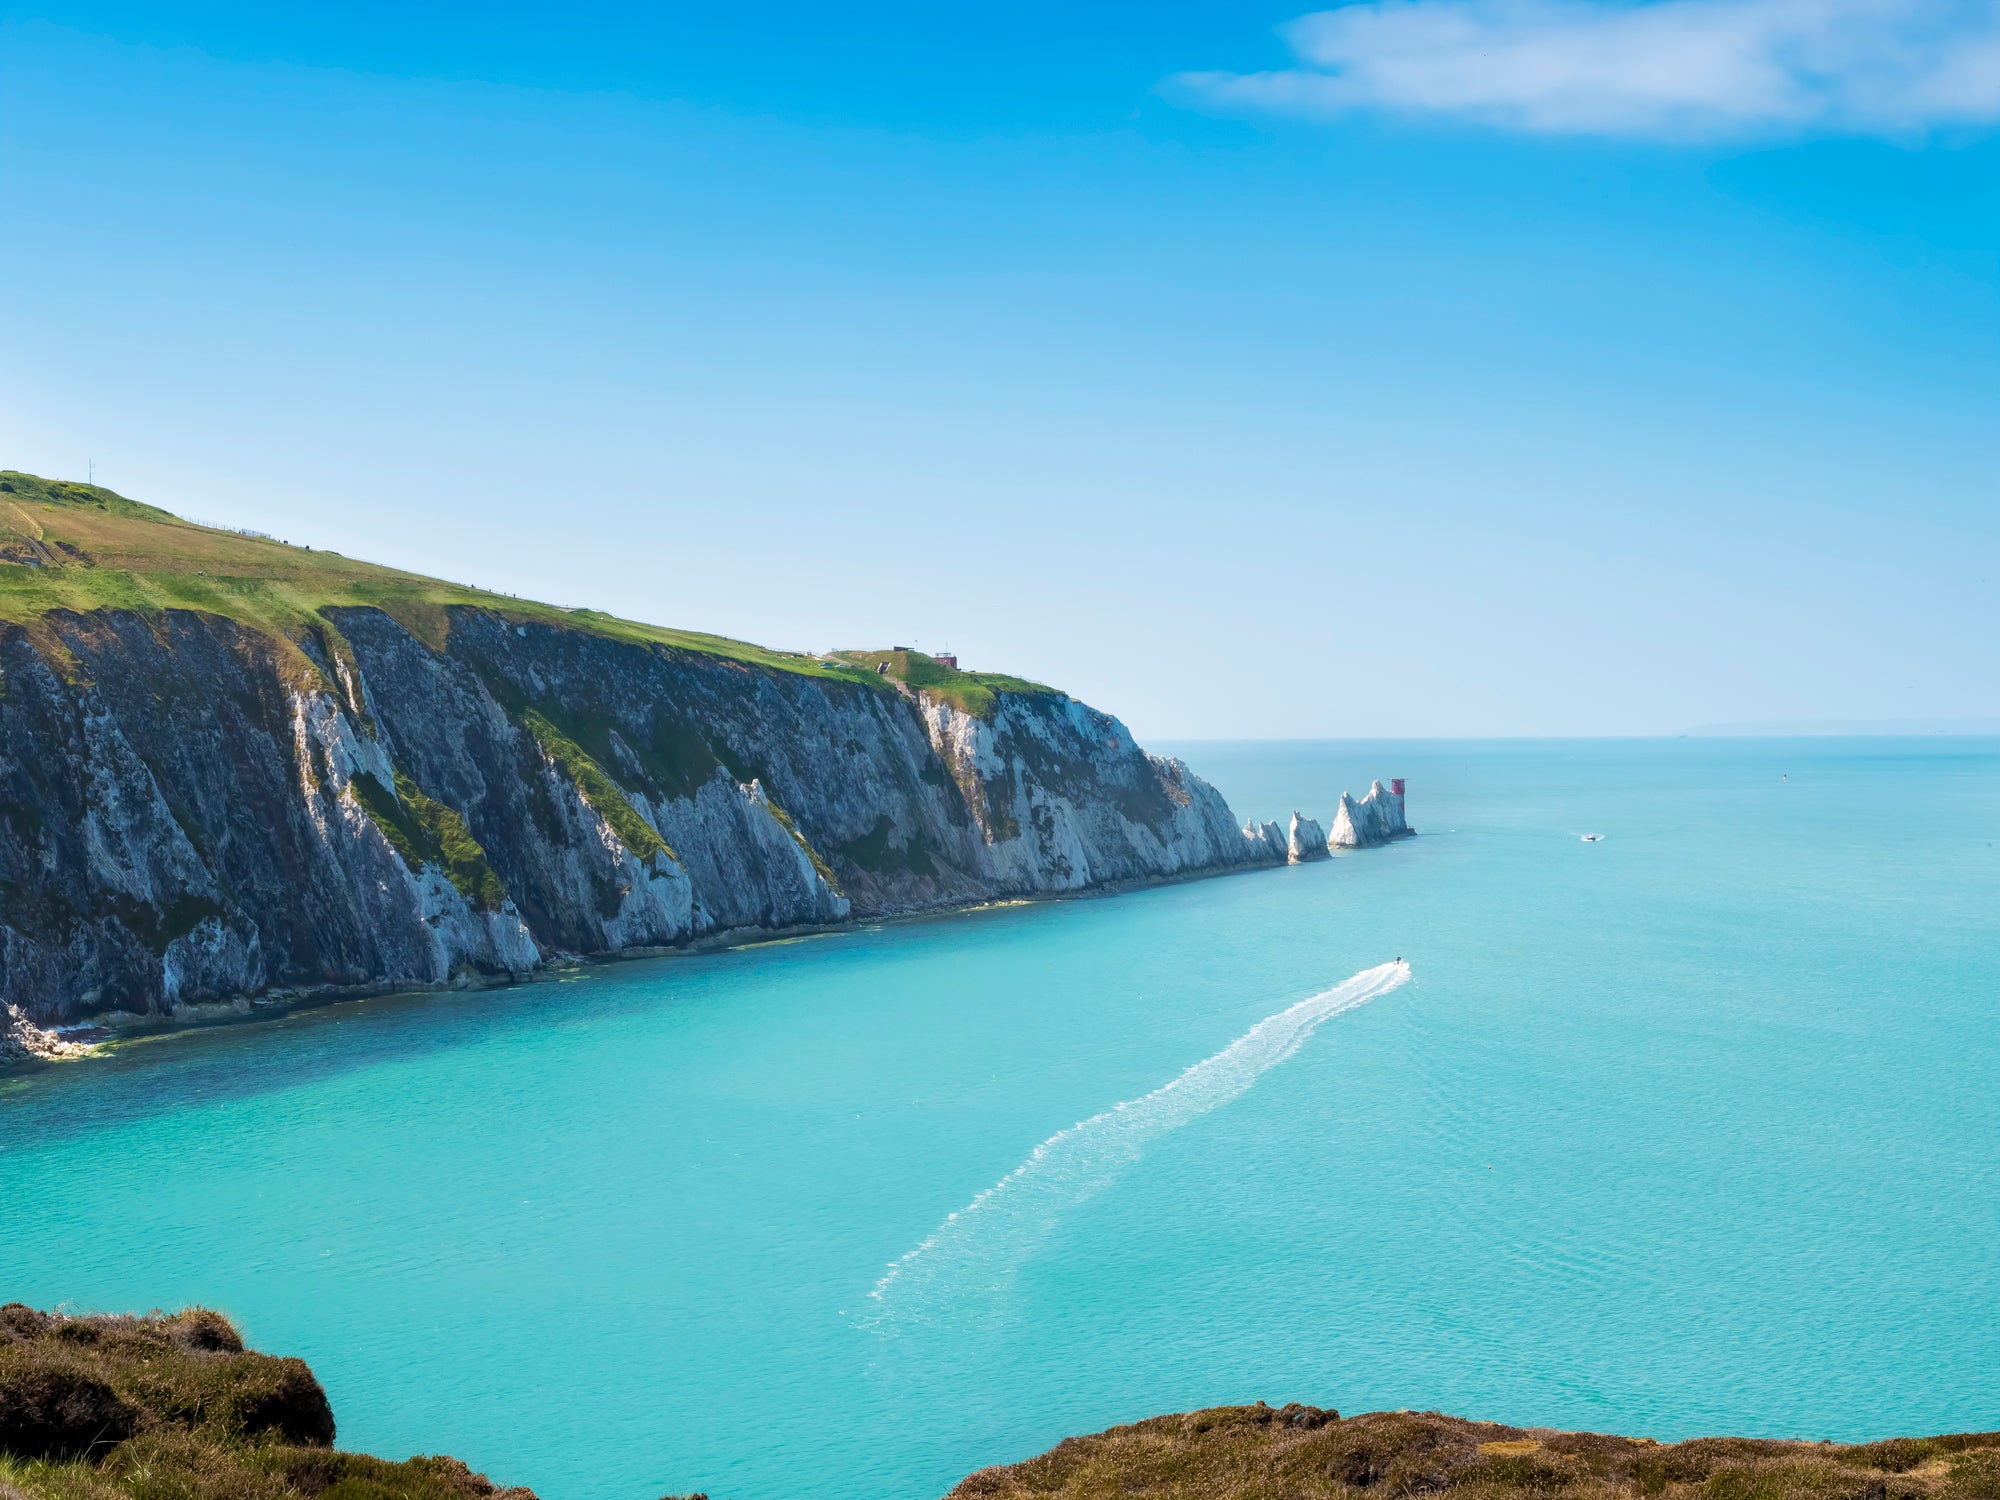 The Needles are one of the Isle of Wight icons